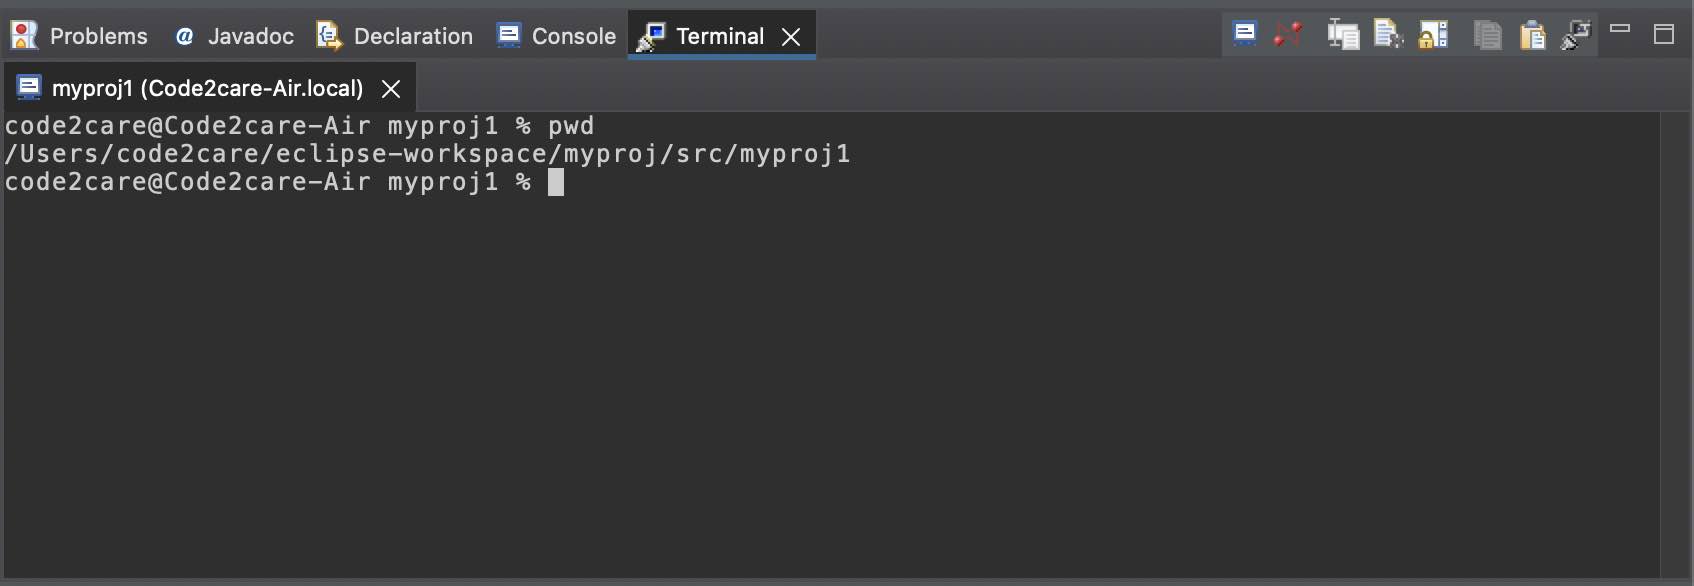 Open Terminal in Eclipse with current pwd